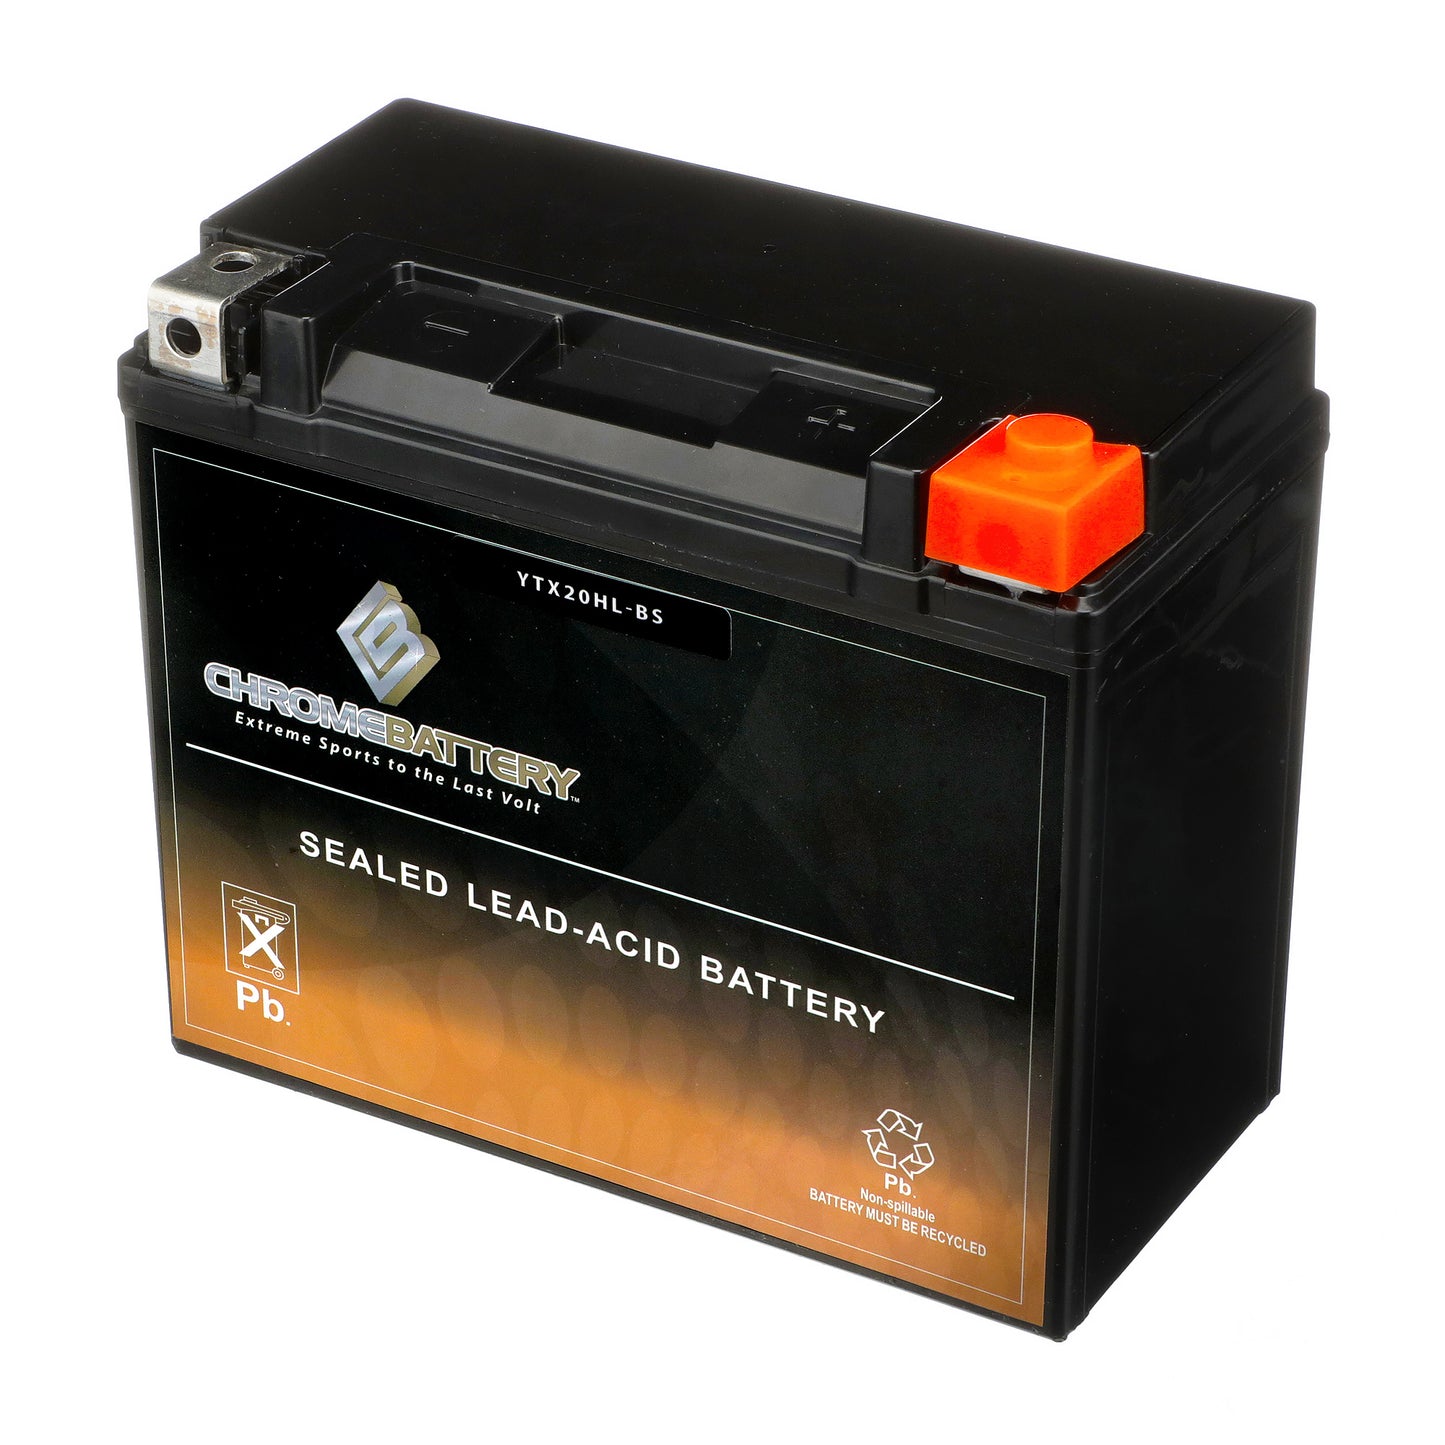 YTX20HL-BS Refurbished High Performance Power Sports Battery